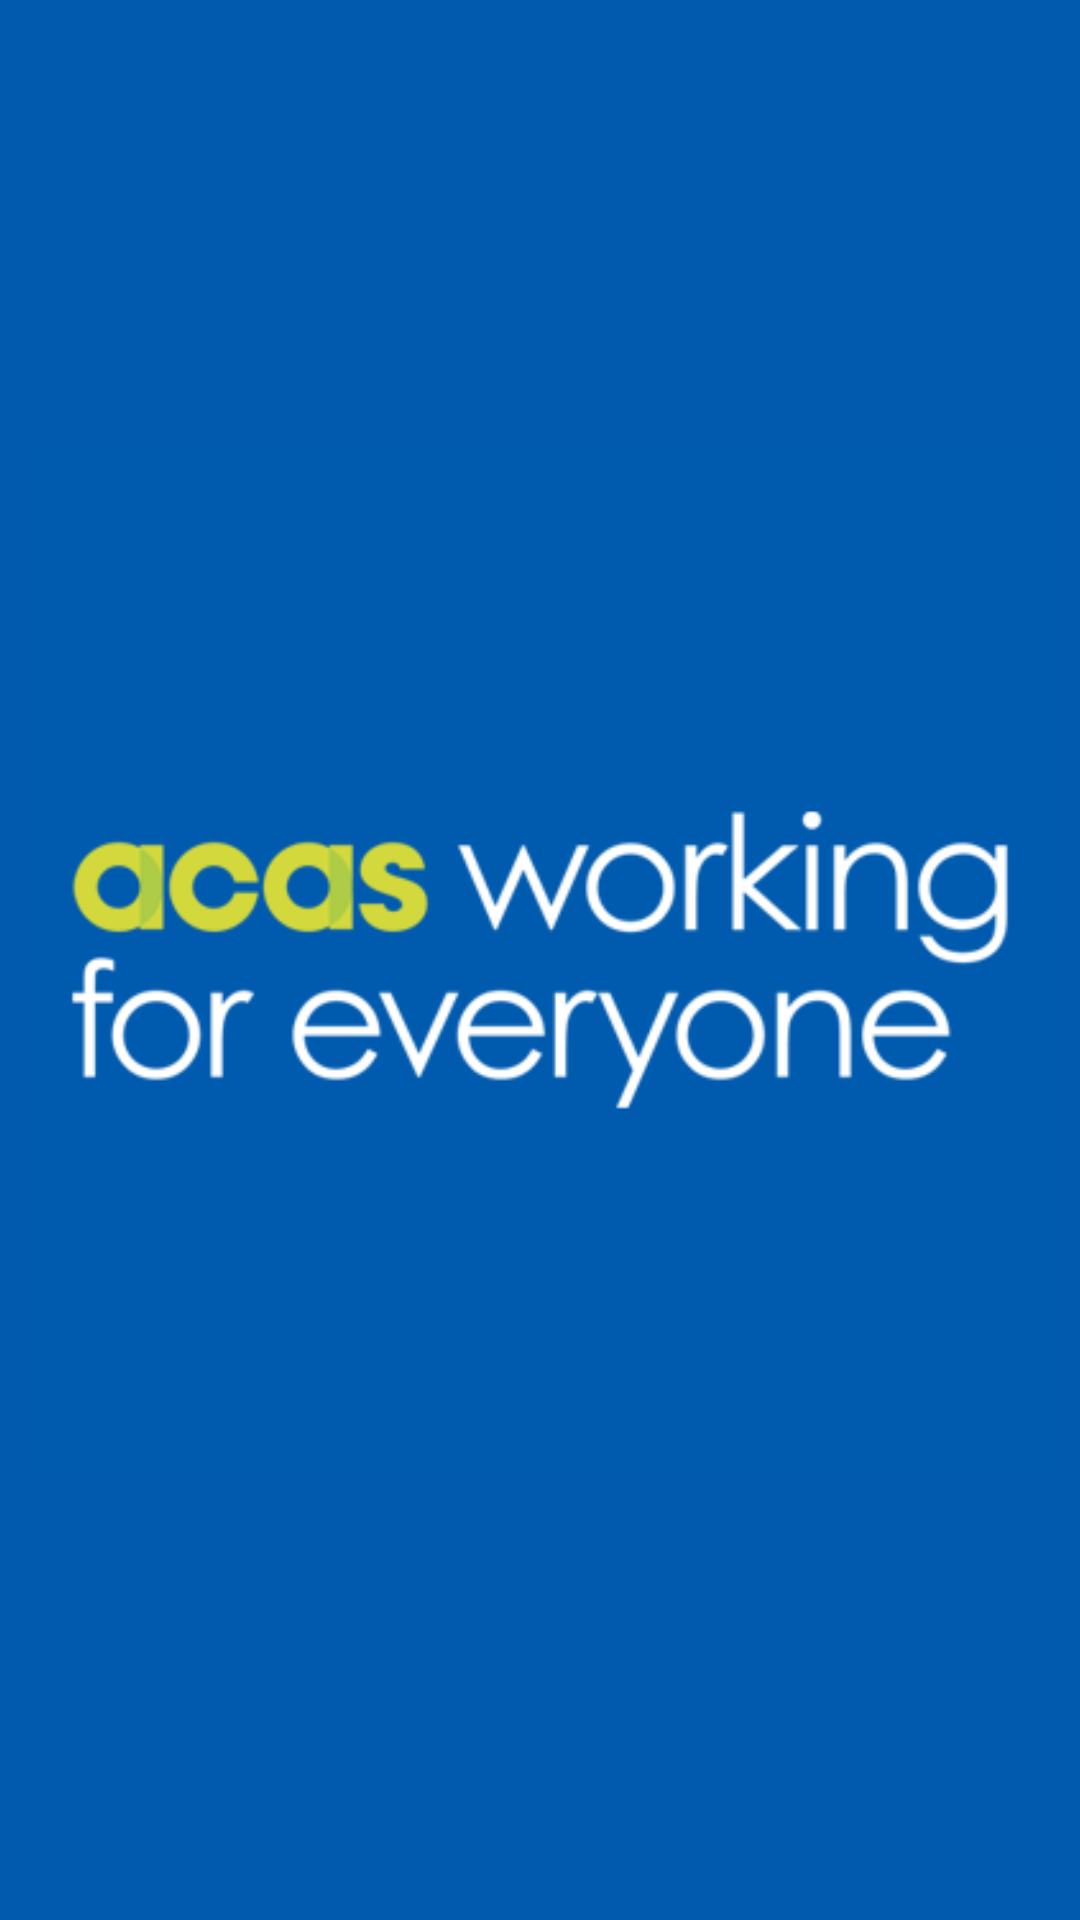 Acas: Mental health and wellbeing in the workplace